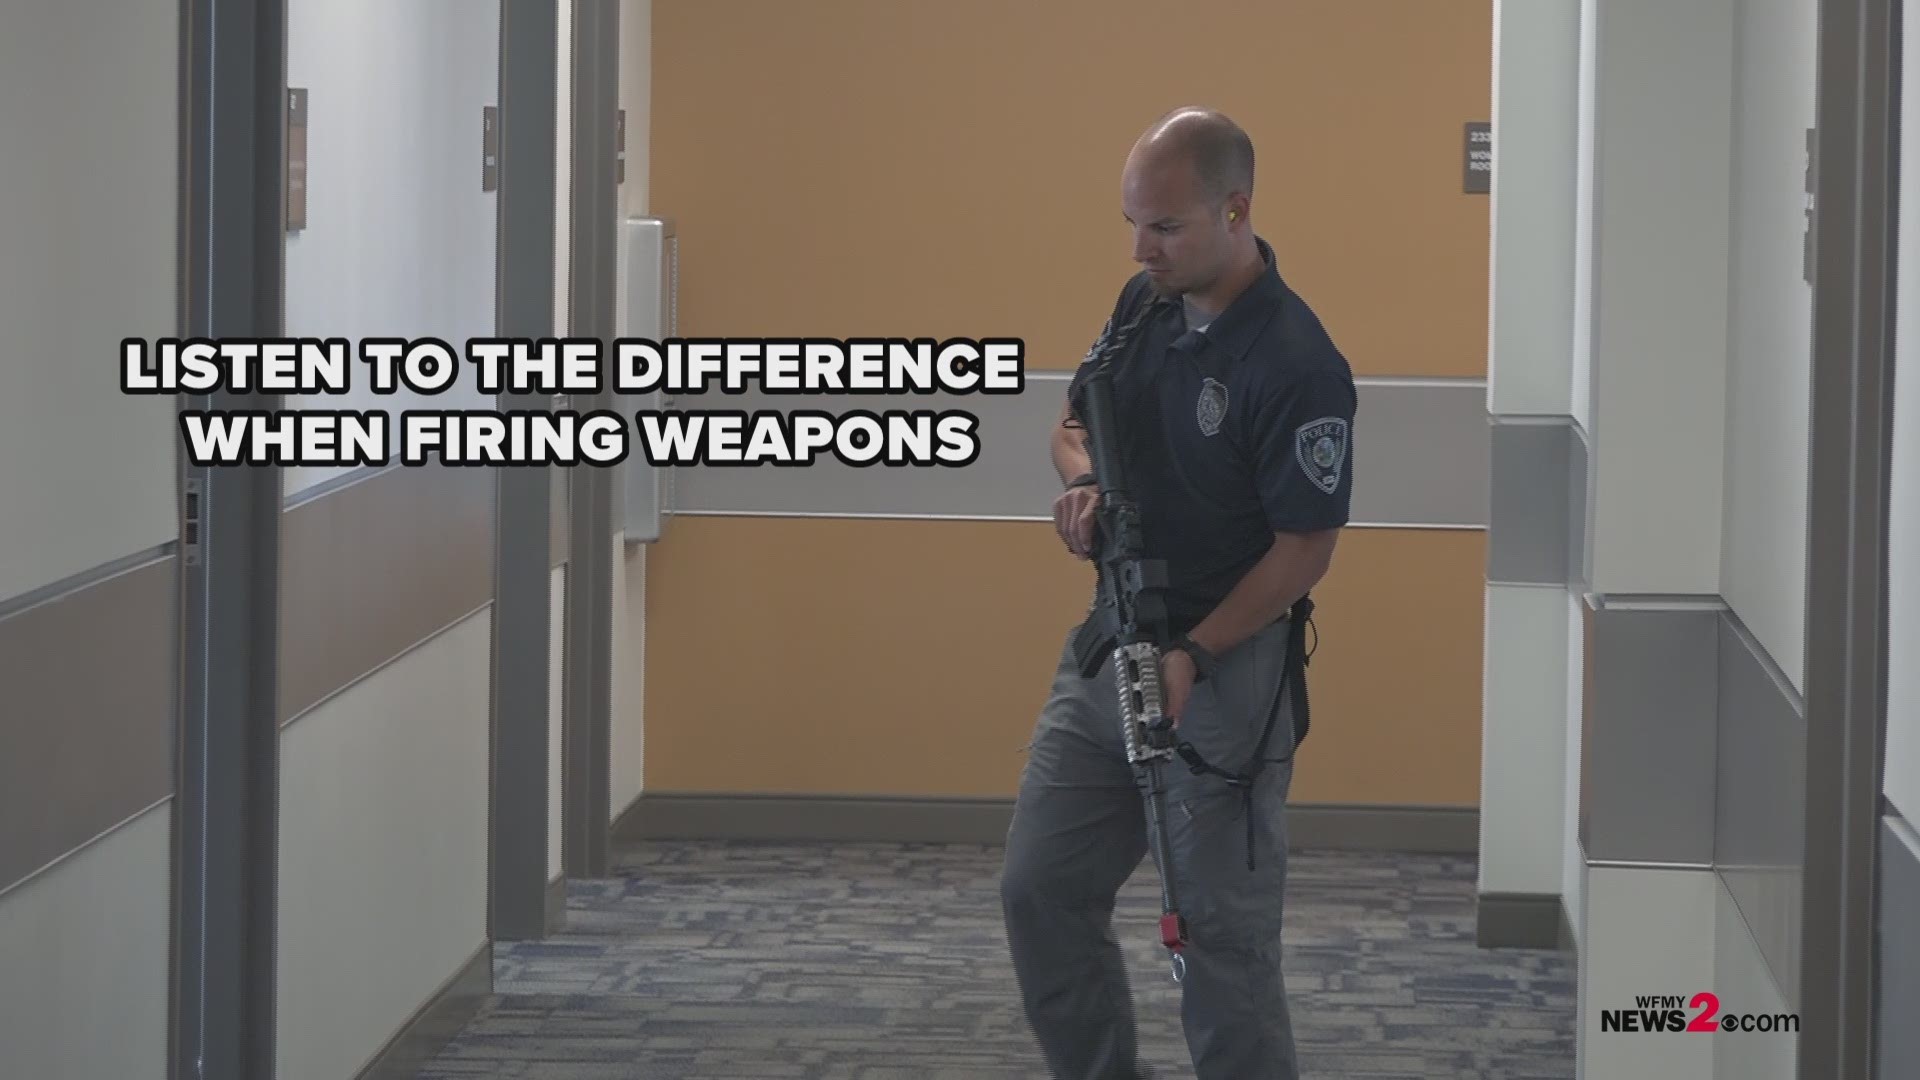 From what a weapon sounds like to how to take down an active shooter, you’ll want to watch this video that could save a life. UNCG teamed up with Greensboro Police for an active shooter demonstration but we could all learn something.